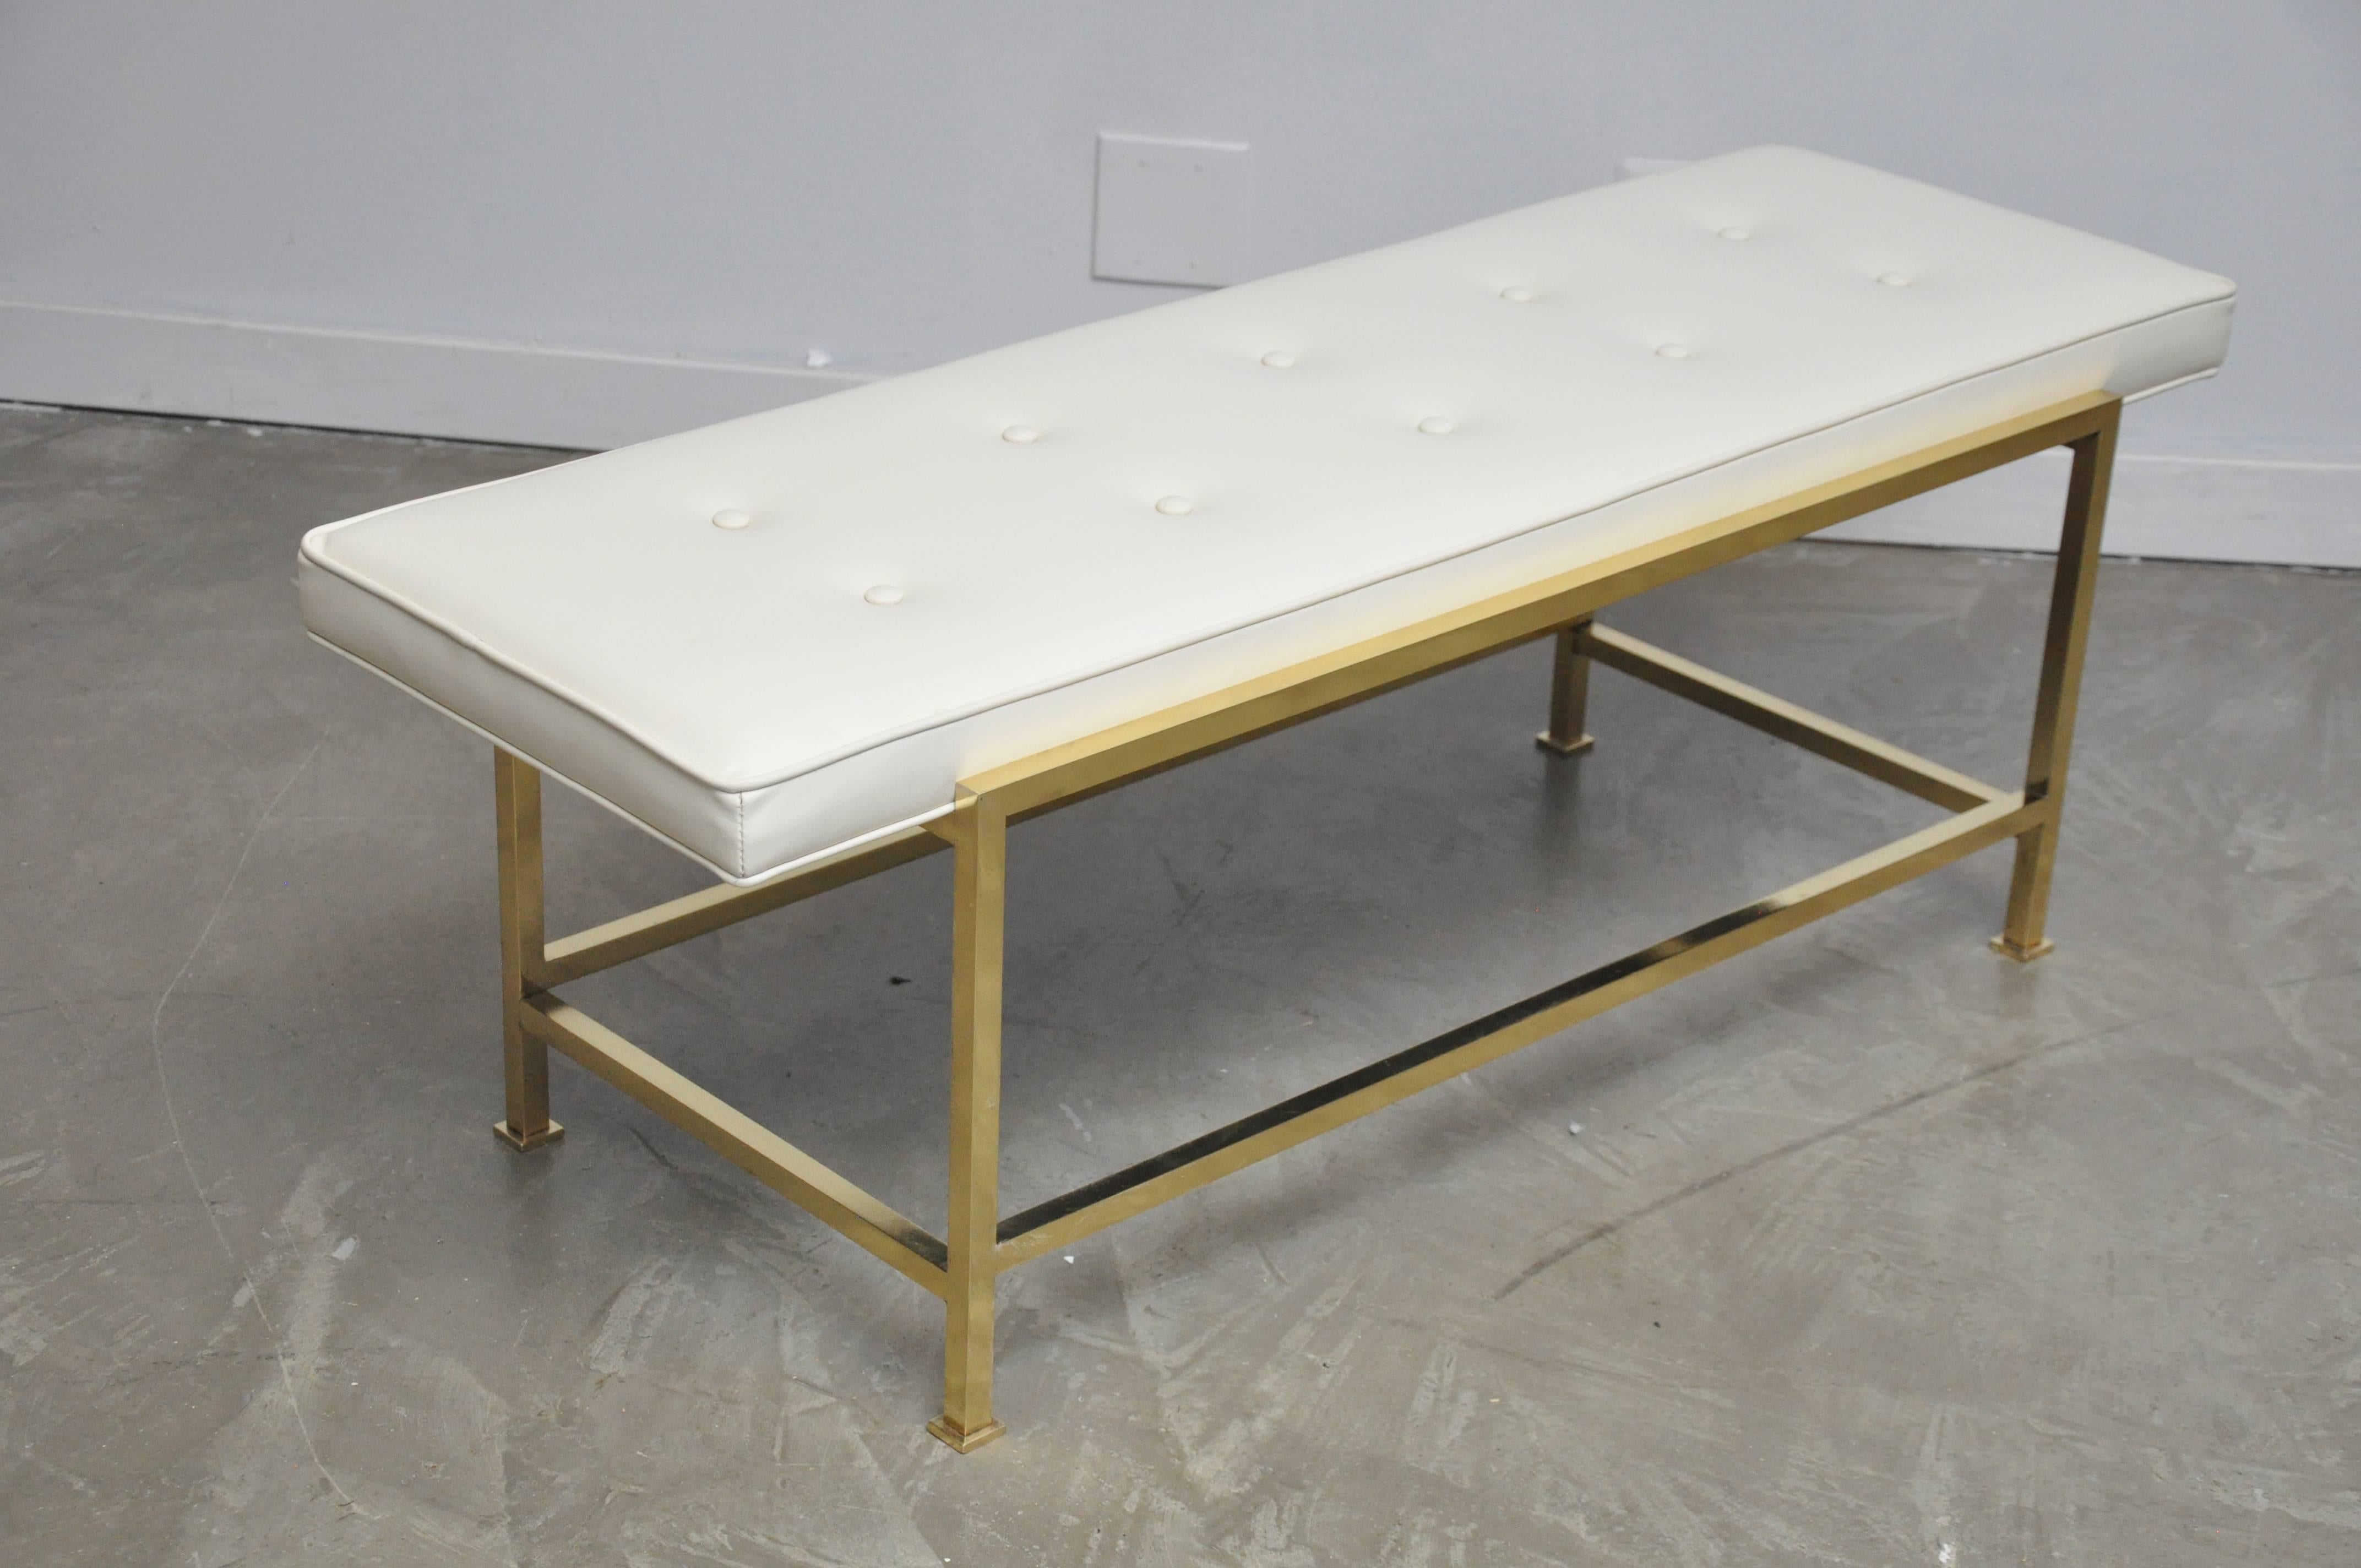 Brass base bench by Edward Wormley for Dunbar. Newly upholstered in white leather. Design circa 1950.